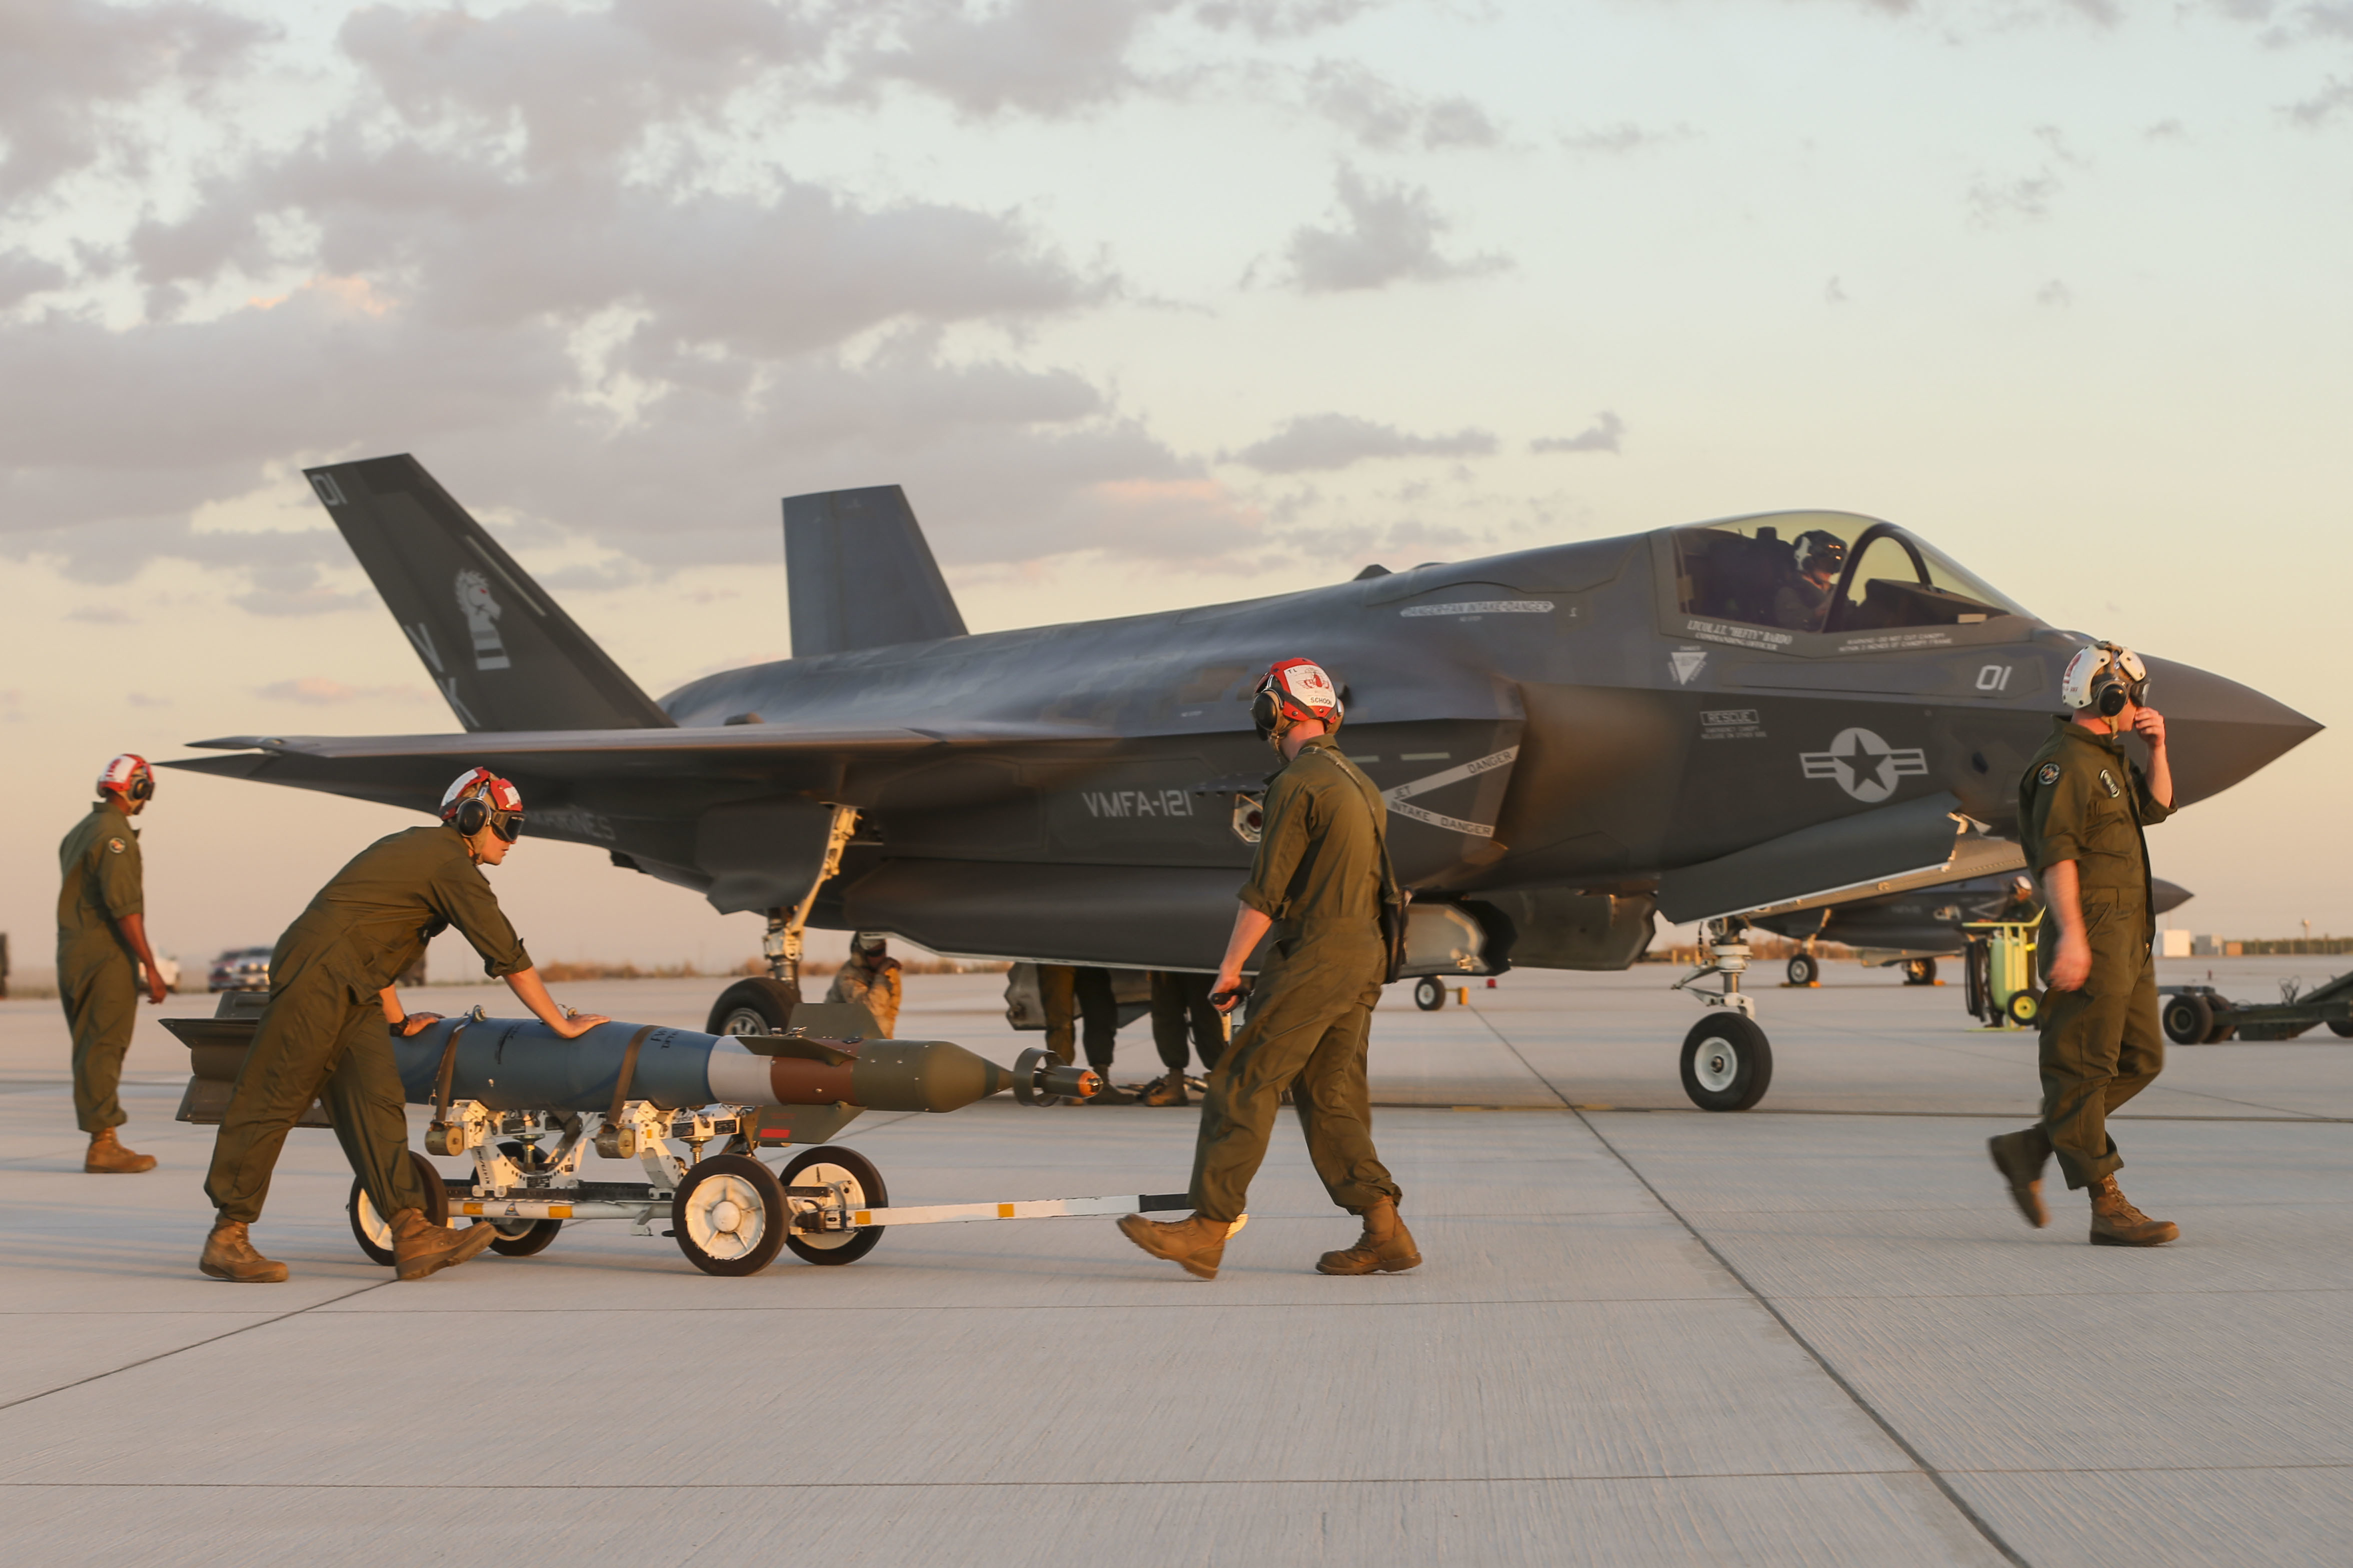 U.S. Marines with Marine Fighter Attack Squadron 121 (VMFA-121), 3rd Marine Aircraft Wing, conduct the first ever hot load on the F-35B Lightning II in support of Weapons and Tactics Instructor Course (WTI) 1-17 at Marine Corps Air Station Yuma, Ariz., Sept. 22, 2016. The exercise is part of WTI 1-17, a seven-week training event hosted by Marine Aviation Weapons and Tactics Squadron One (MAWTS-1) cadre. US Marine Corps photo.